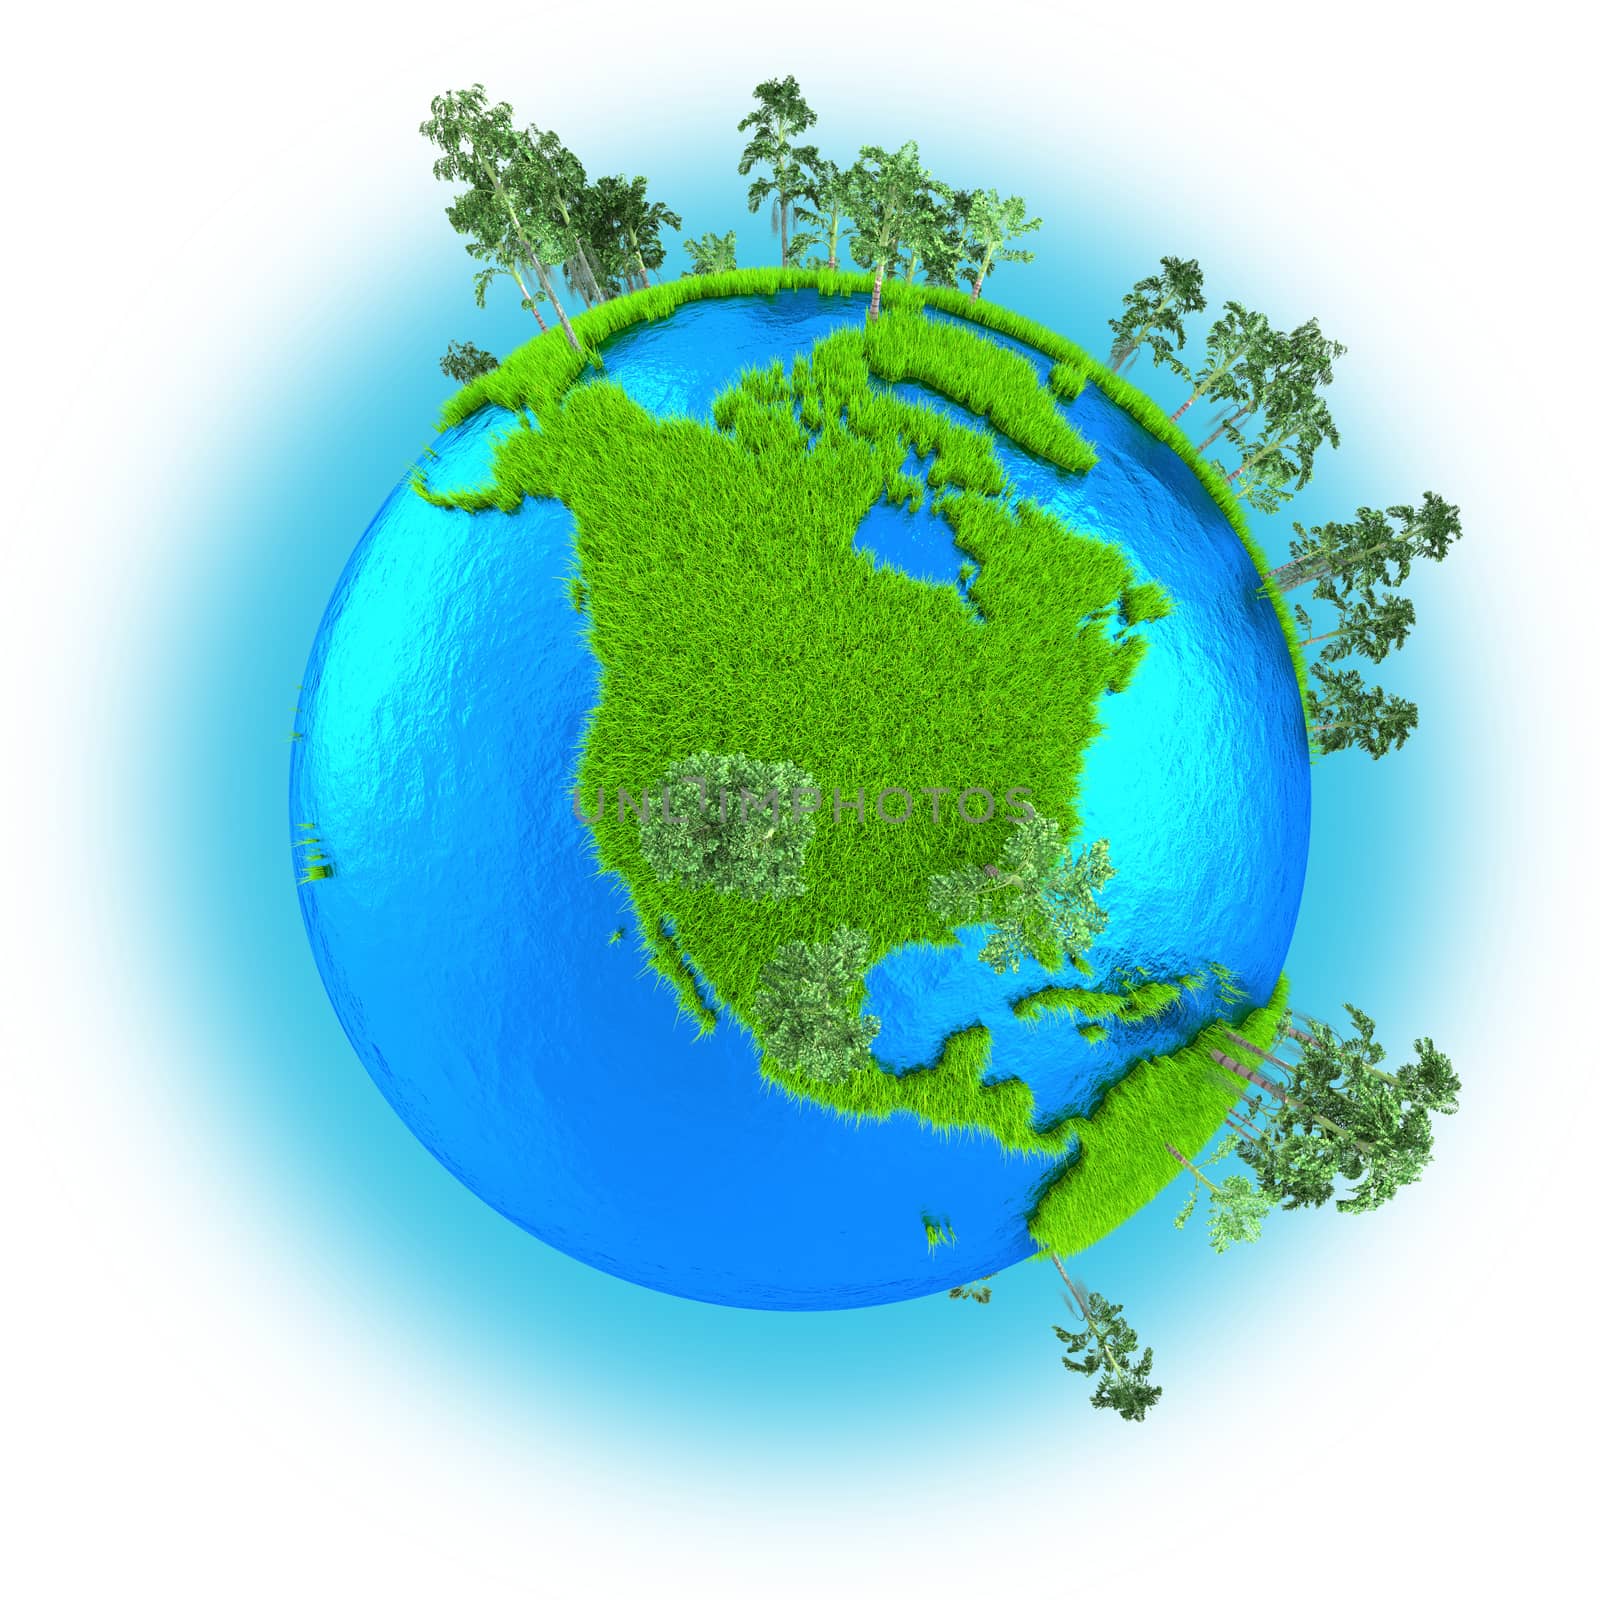 North America on grassy planet Earth with trees isolated on white background